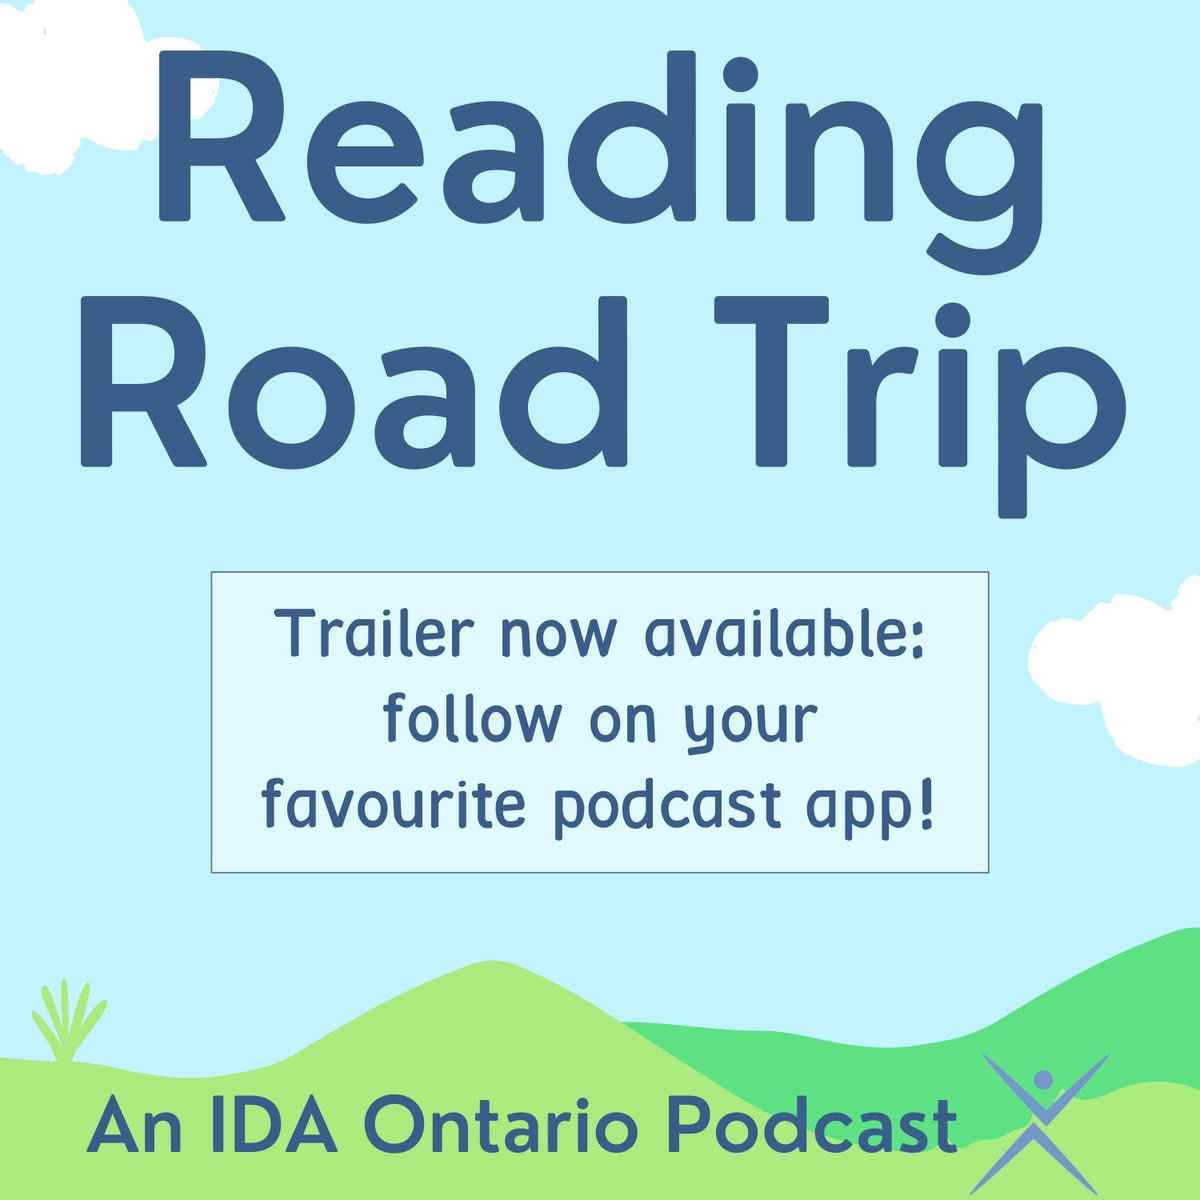 🎙️We are super excited for #ReadingRoadTrip out next week! Check out the trailer with @thismomloves  & @unamalcolm to hear a sneak peek of this season's special guests. 
❤️Like & subscribe and don't miss the July 3 premiere! 
🎧podcast.idaontario.com